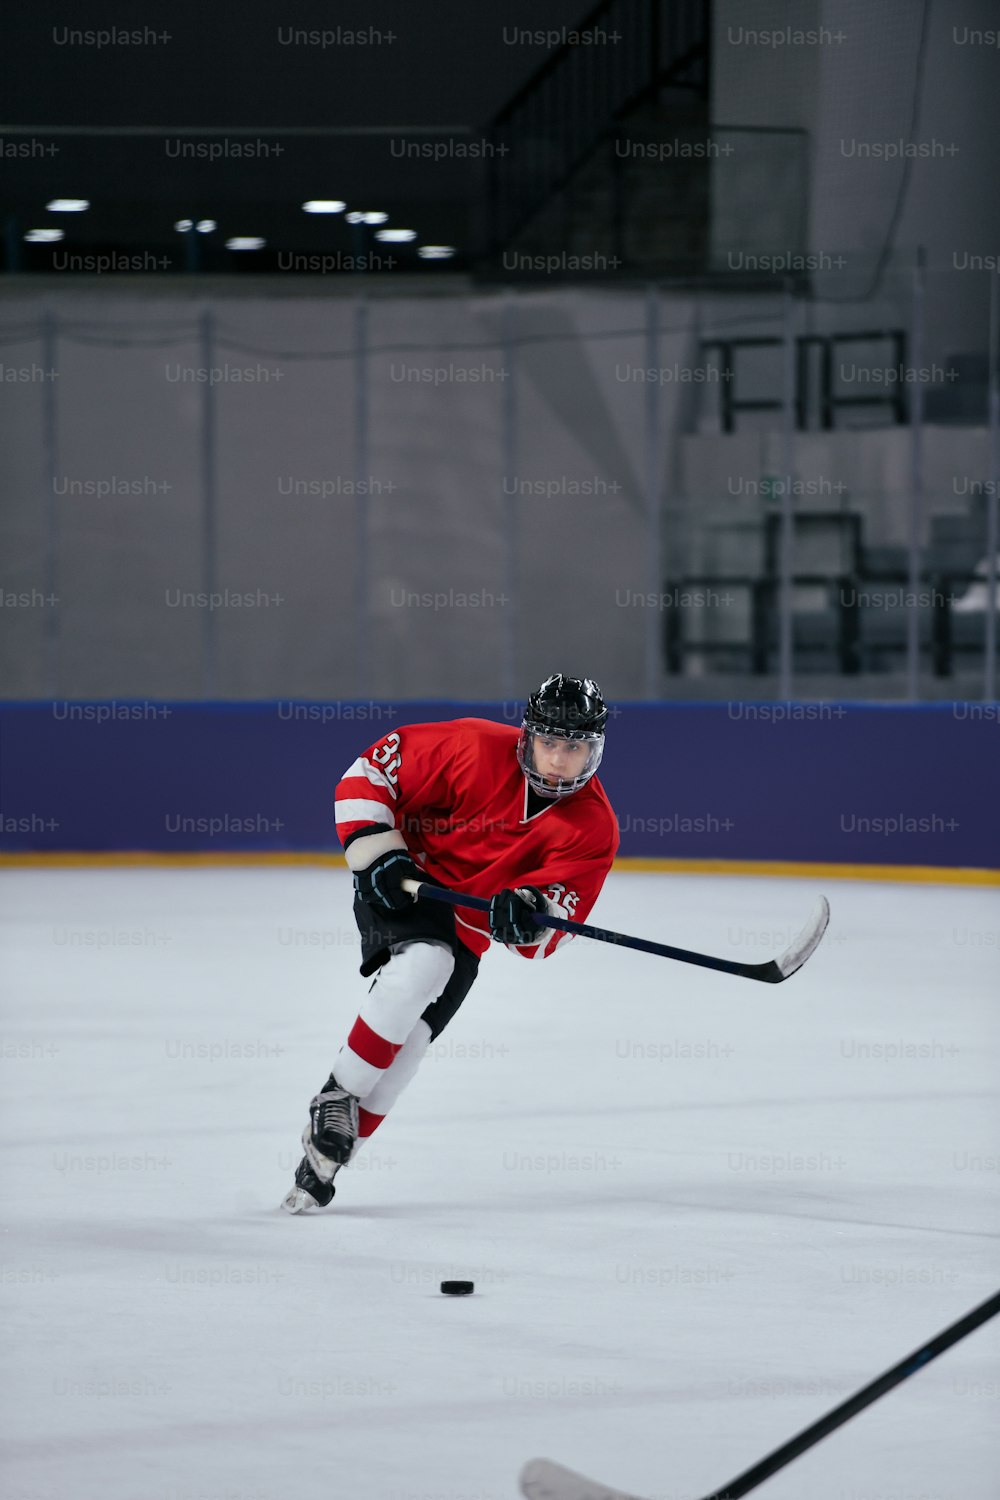 a man in a red jersey is playing hockey